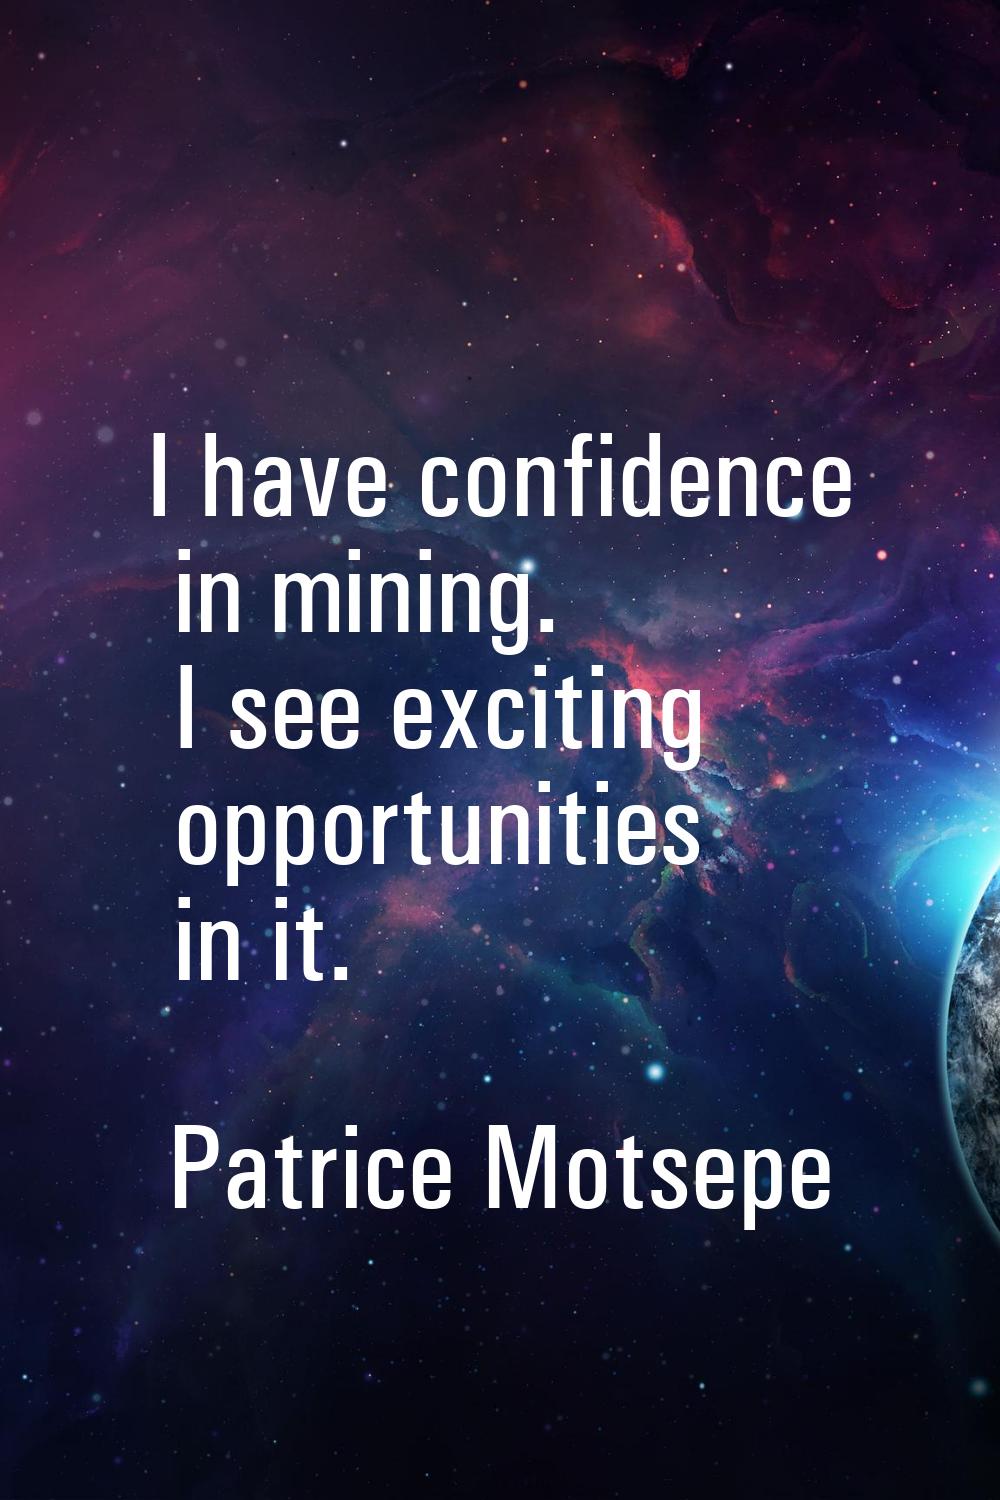 I have confidence in mining. I see exciting opportunities in it.